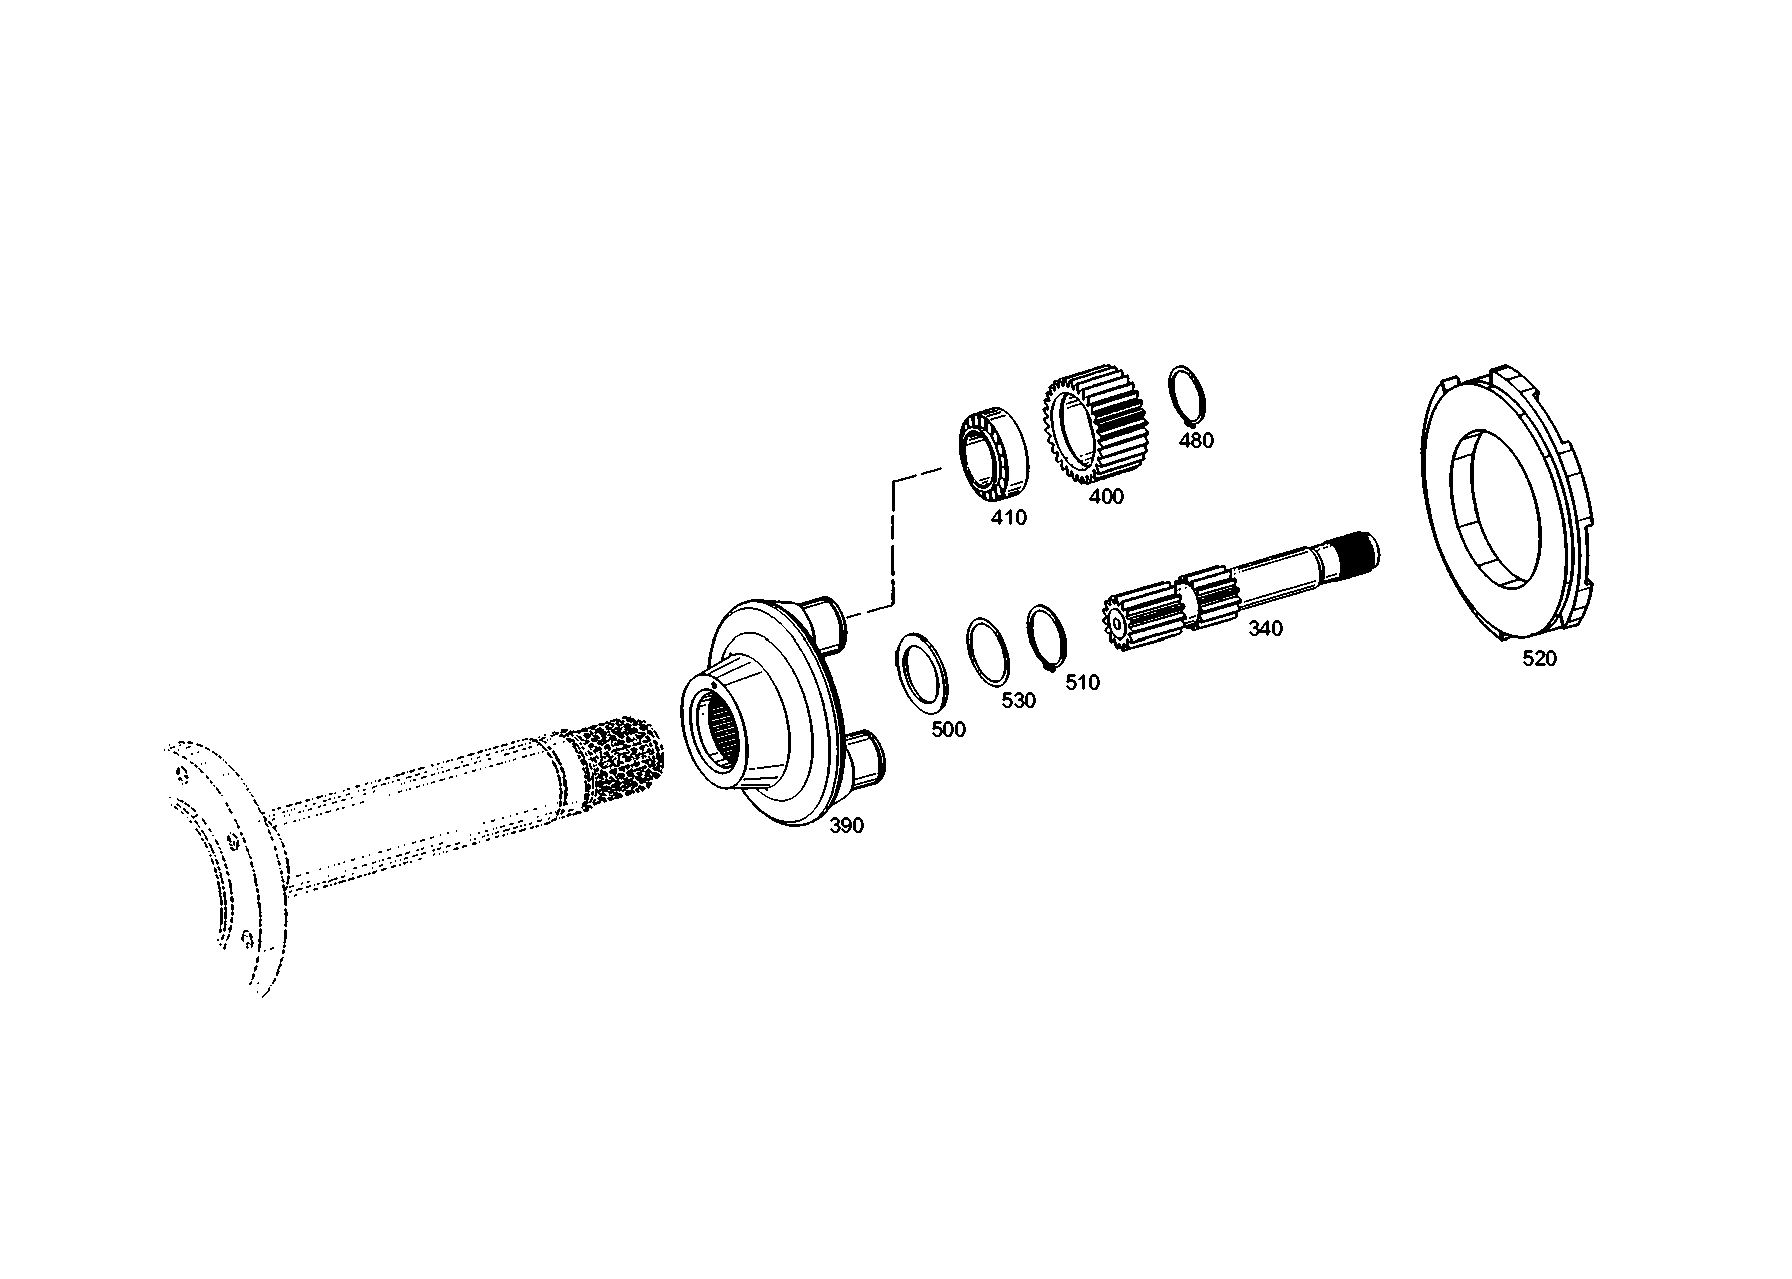 drawing for CUKUROVA AT339627 - CYLINDER ROLLER BEARING (figure 2)